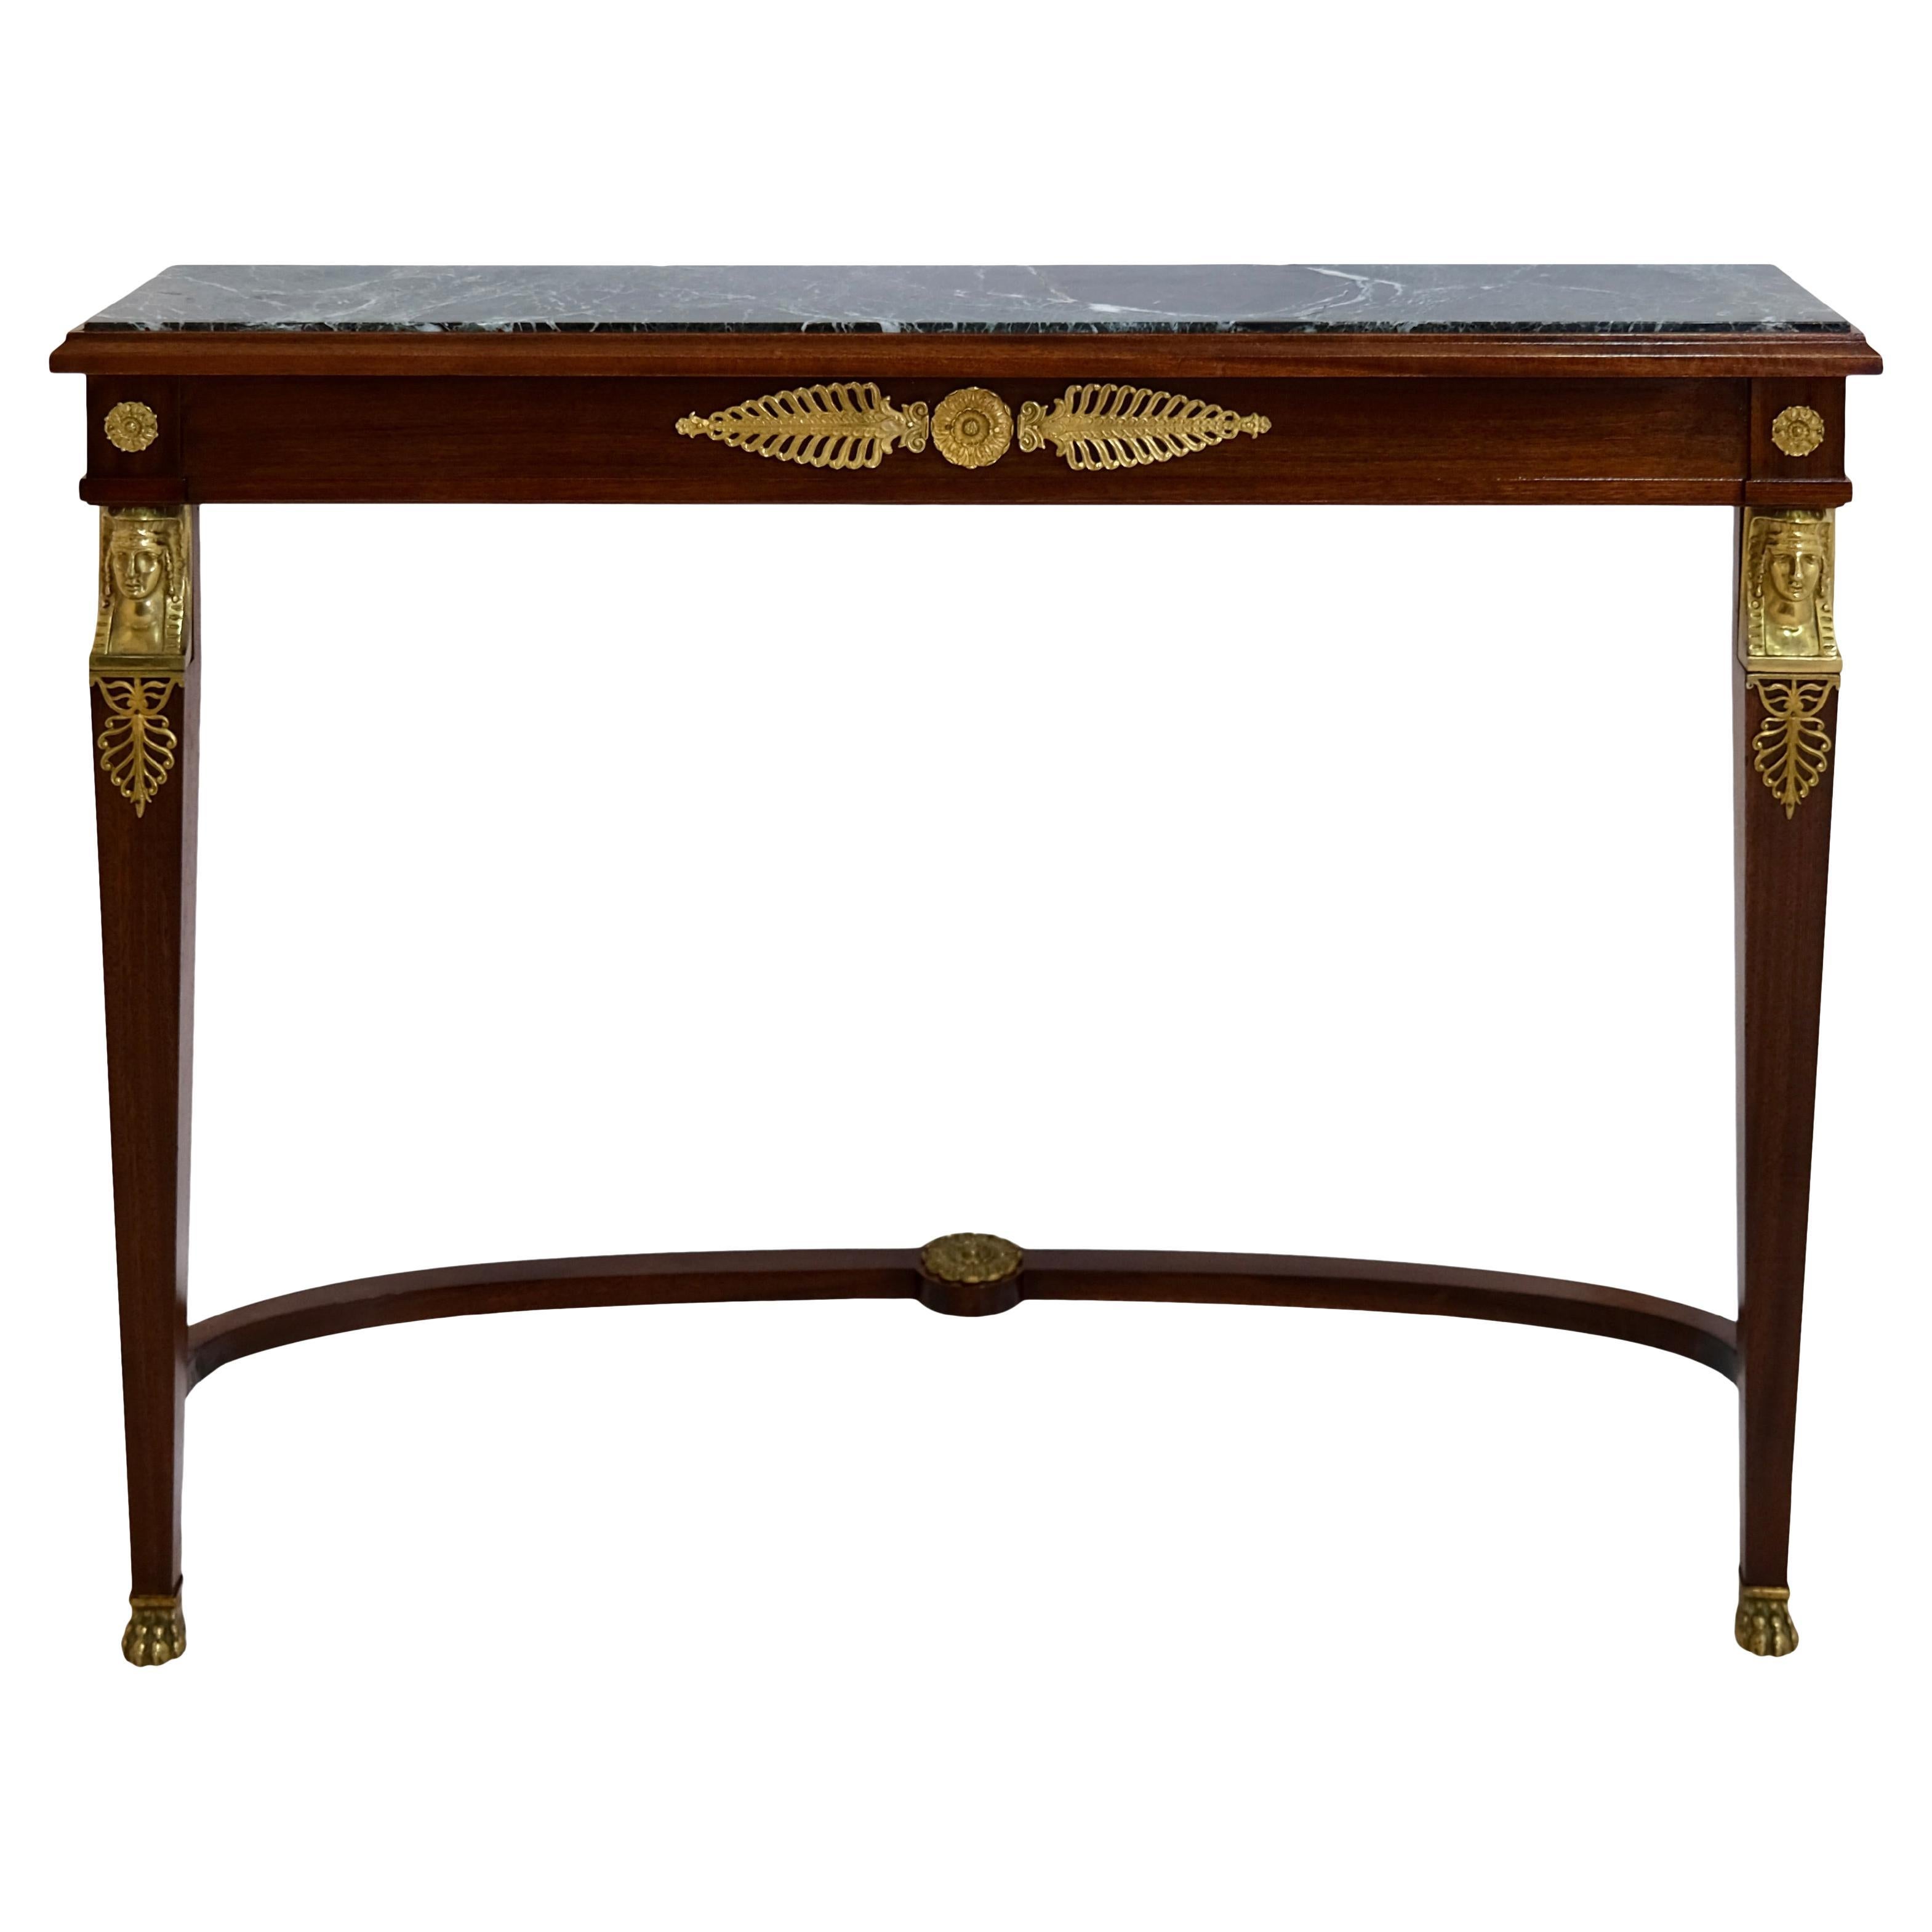 French 1850/60s Empire Console Table in Mahogany with Marble Top